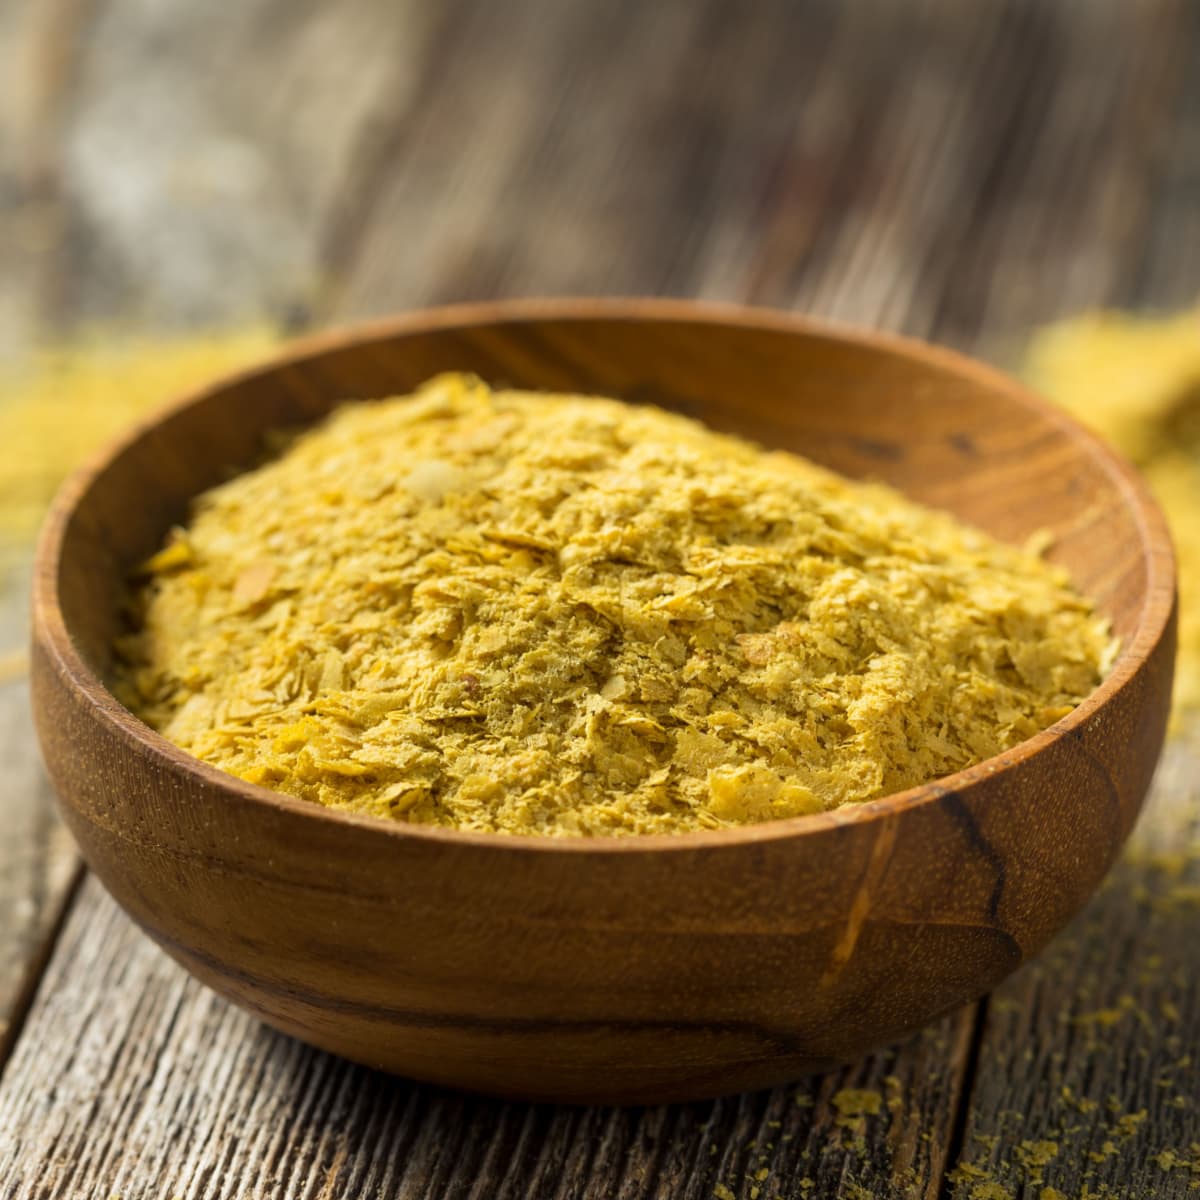 Raw Yellow Organic Nutritional Yeast in a Bowl